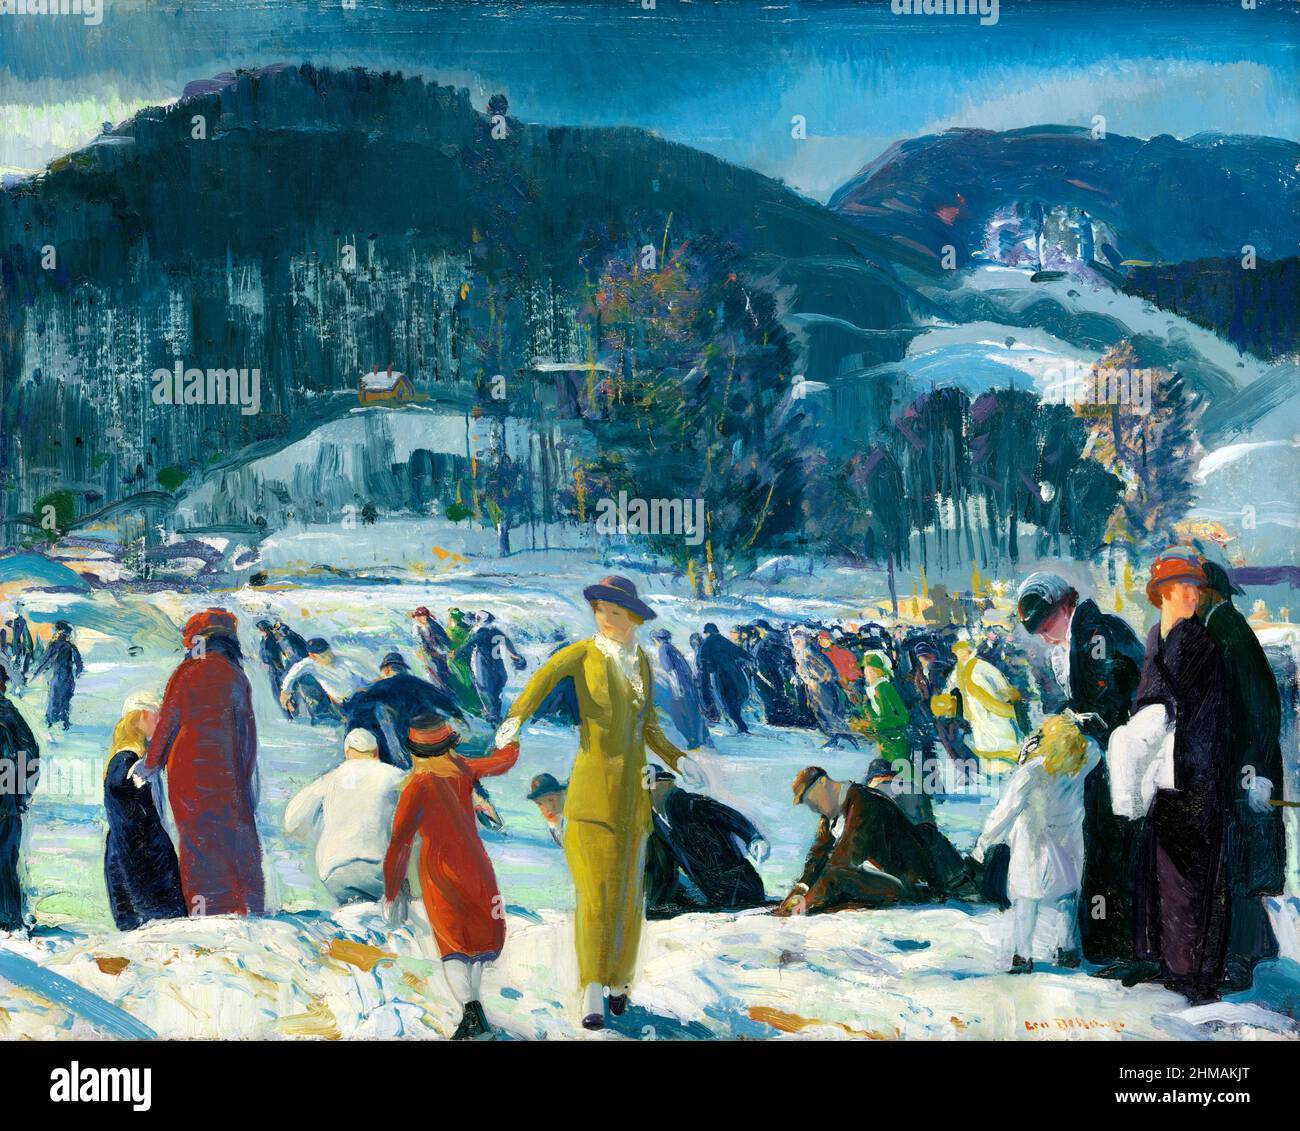 Love of Winter by George Bellows (1882-1925), oil on canvas, 1914 Stock Photo